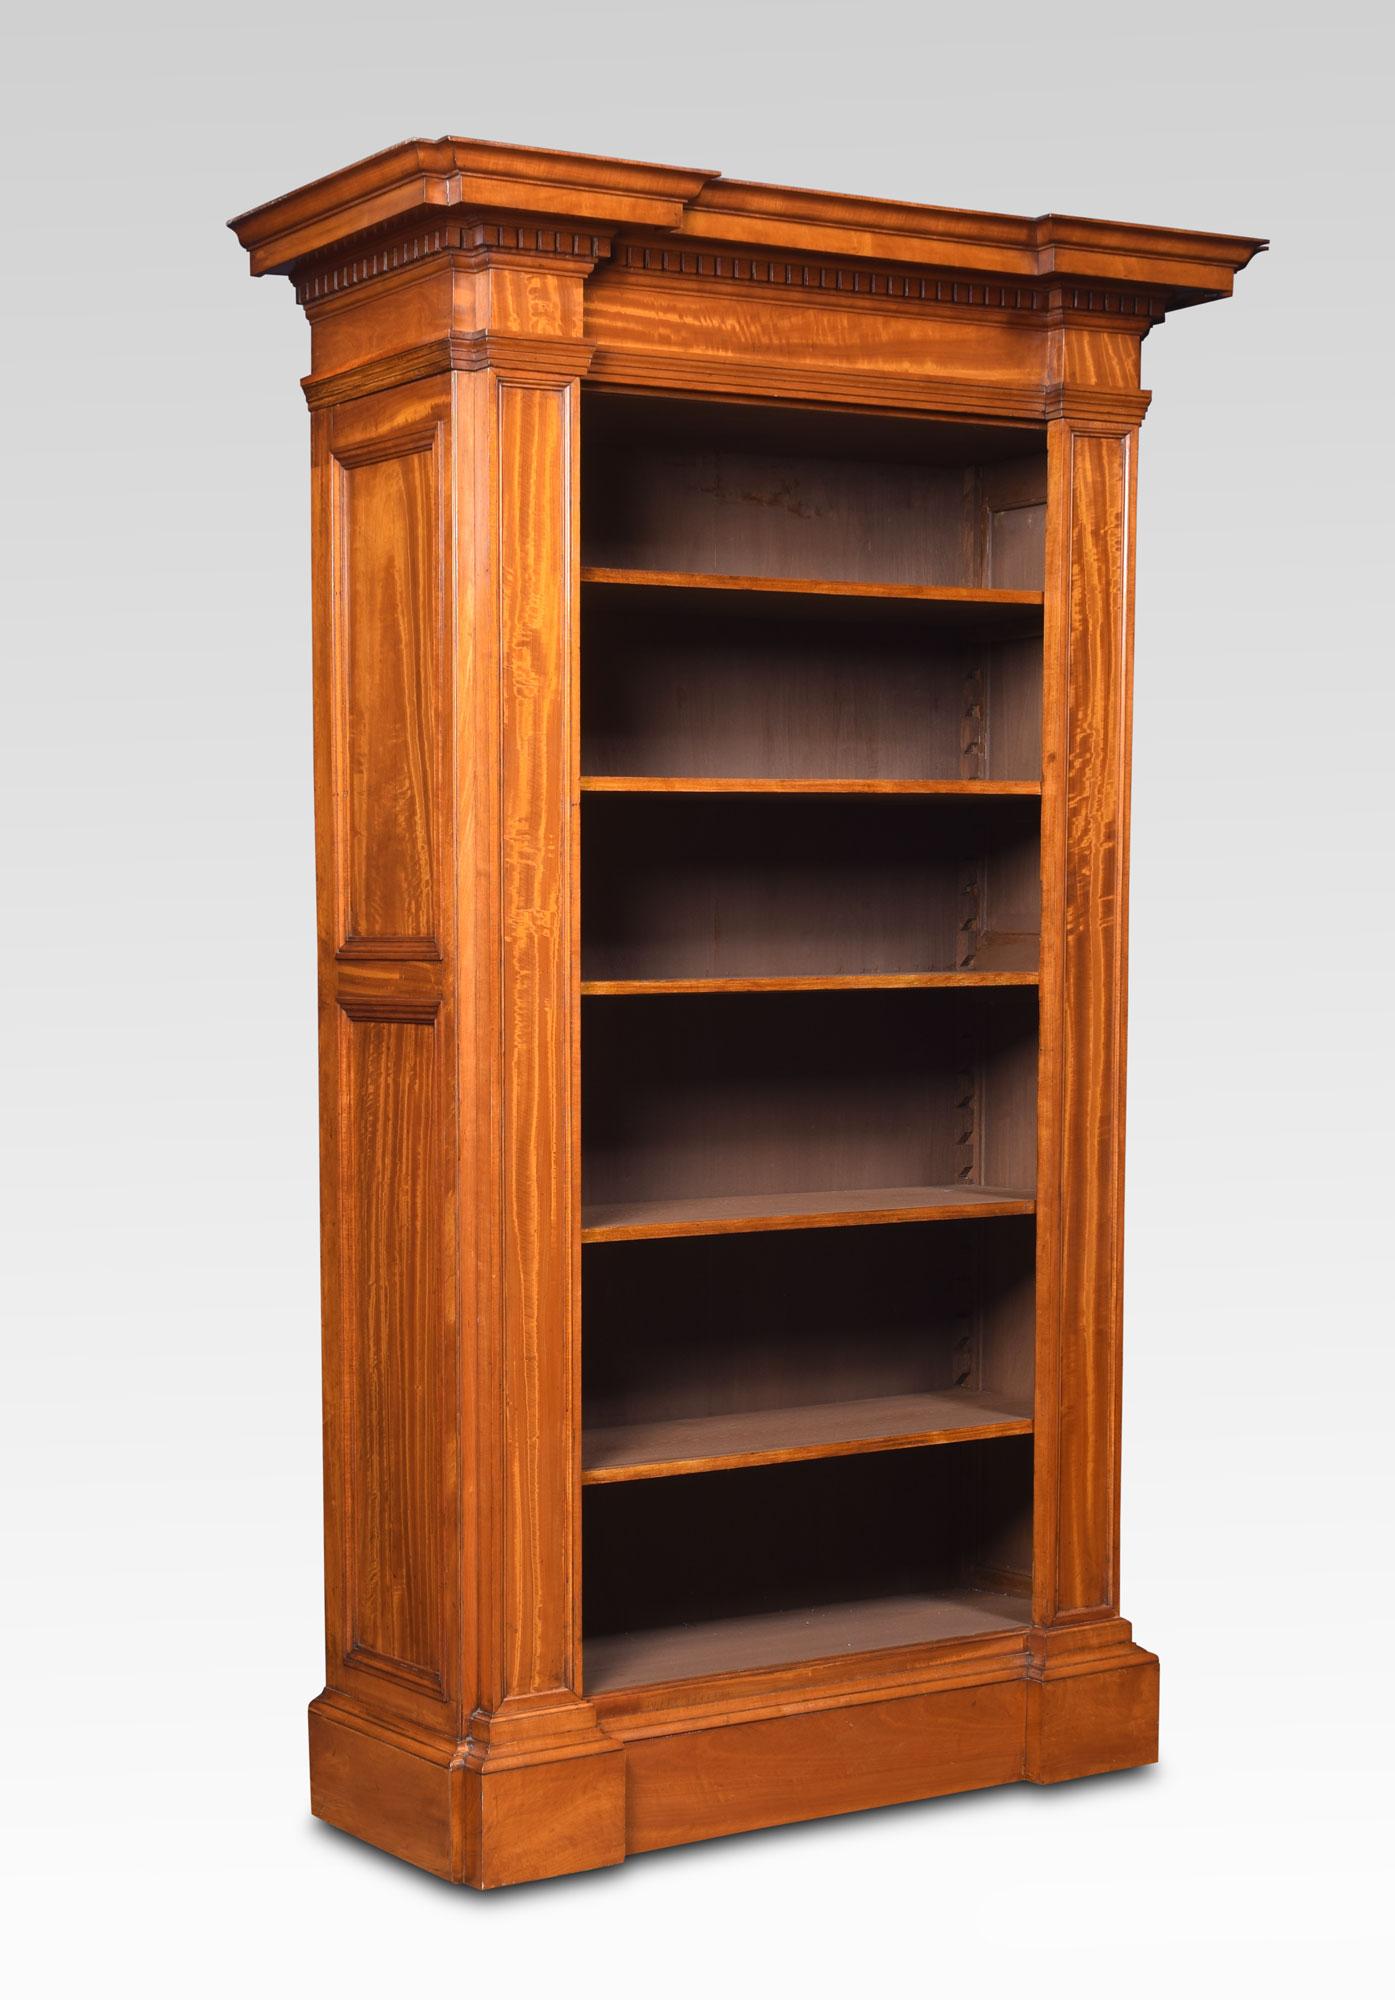 19th century satinwood open bookcase of architectural form, the stepped moulded cornice and dentil moulded frieze above five adjustable shelves flanked with fielded pilasters and panelled sides all raised up on a plinth base.
Dimensions:
Height 71